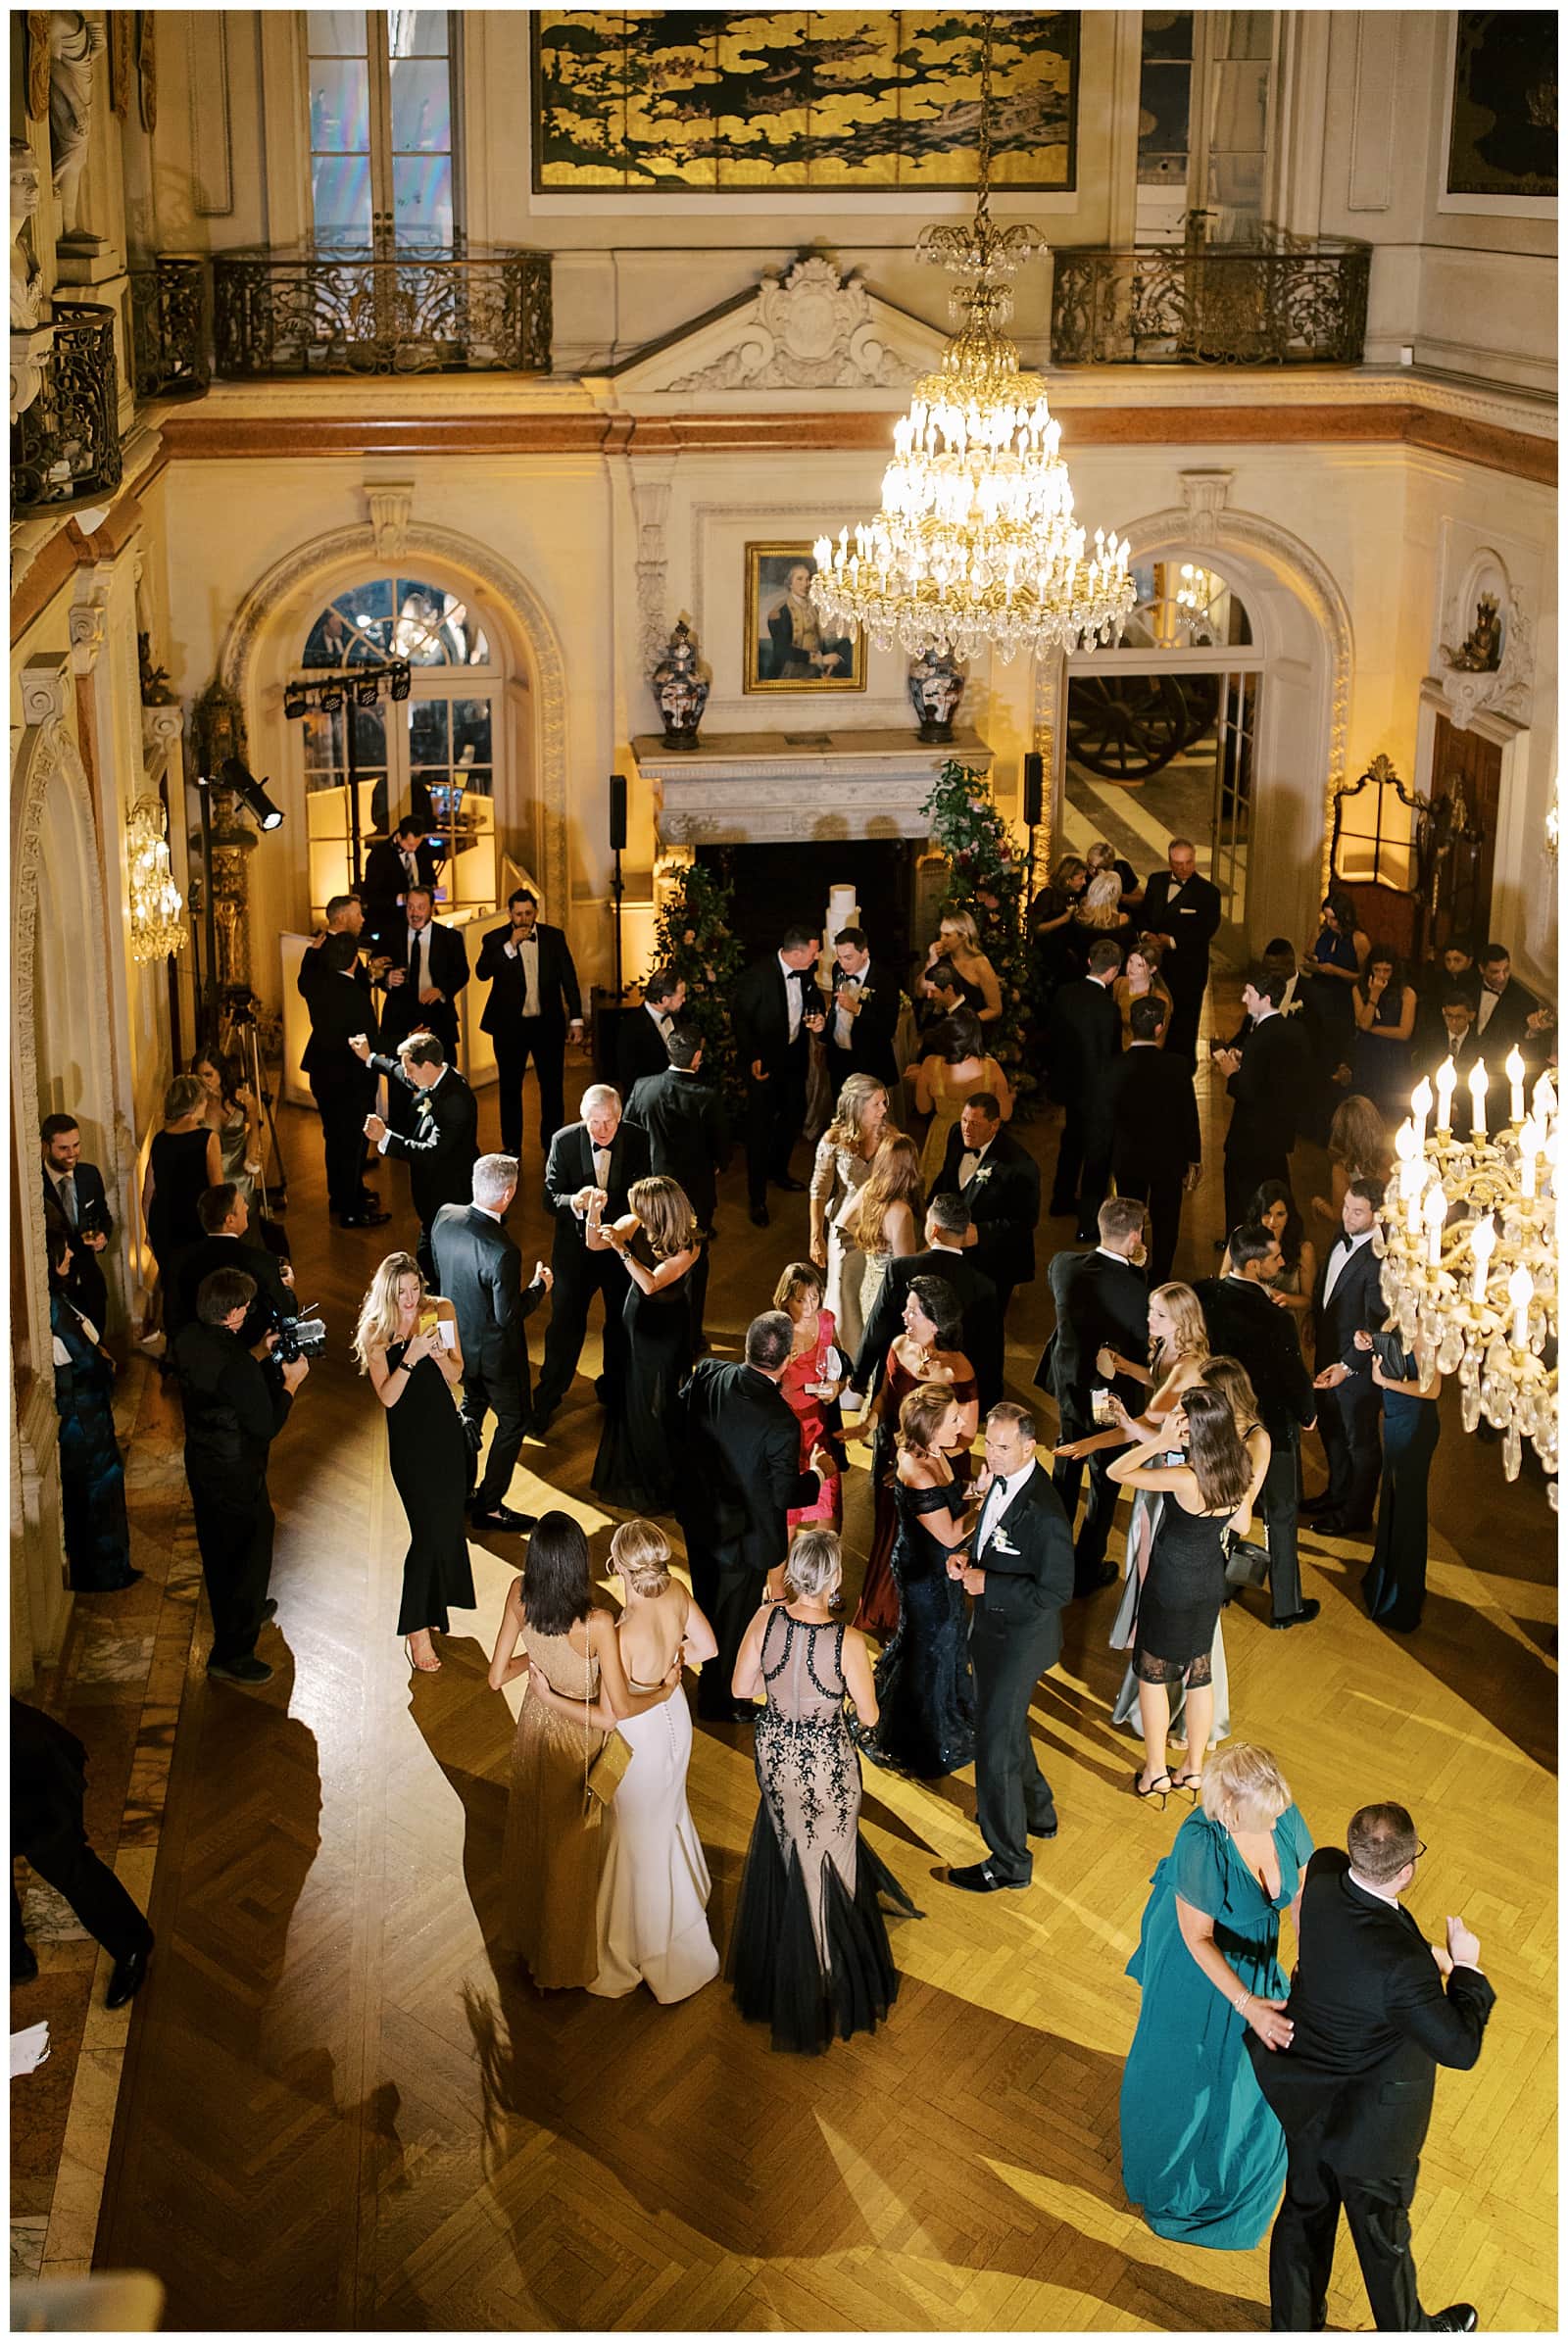 Aerial view of the ballroom at Larz Anderson House in Washington DC with black tie guests dancing inside